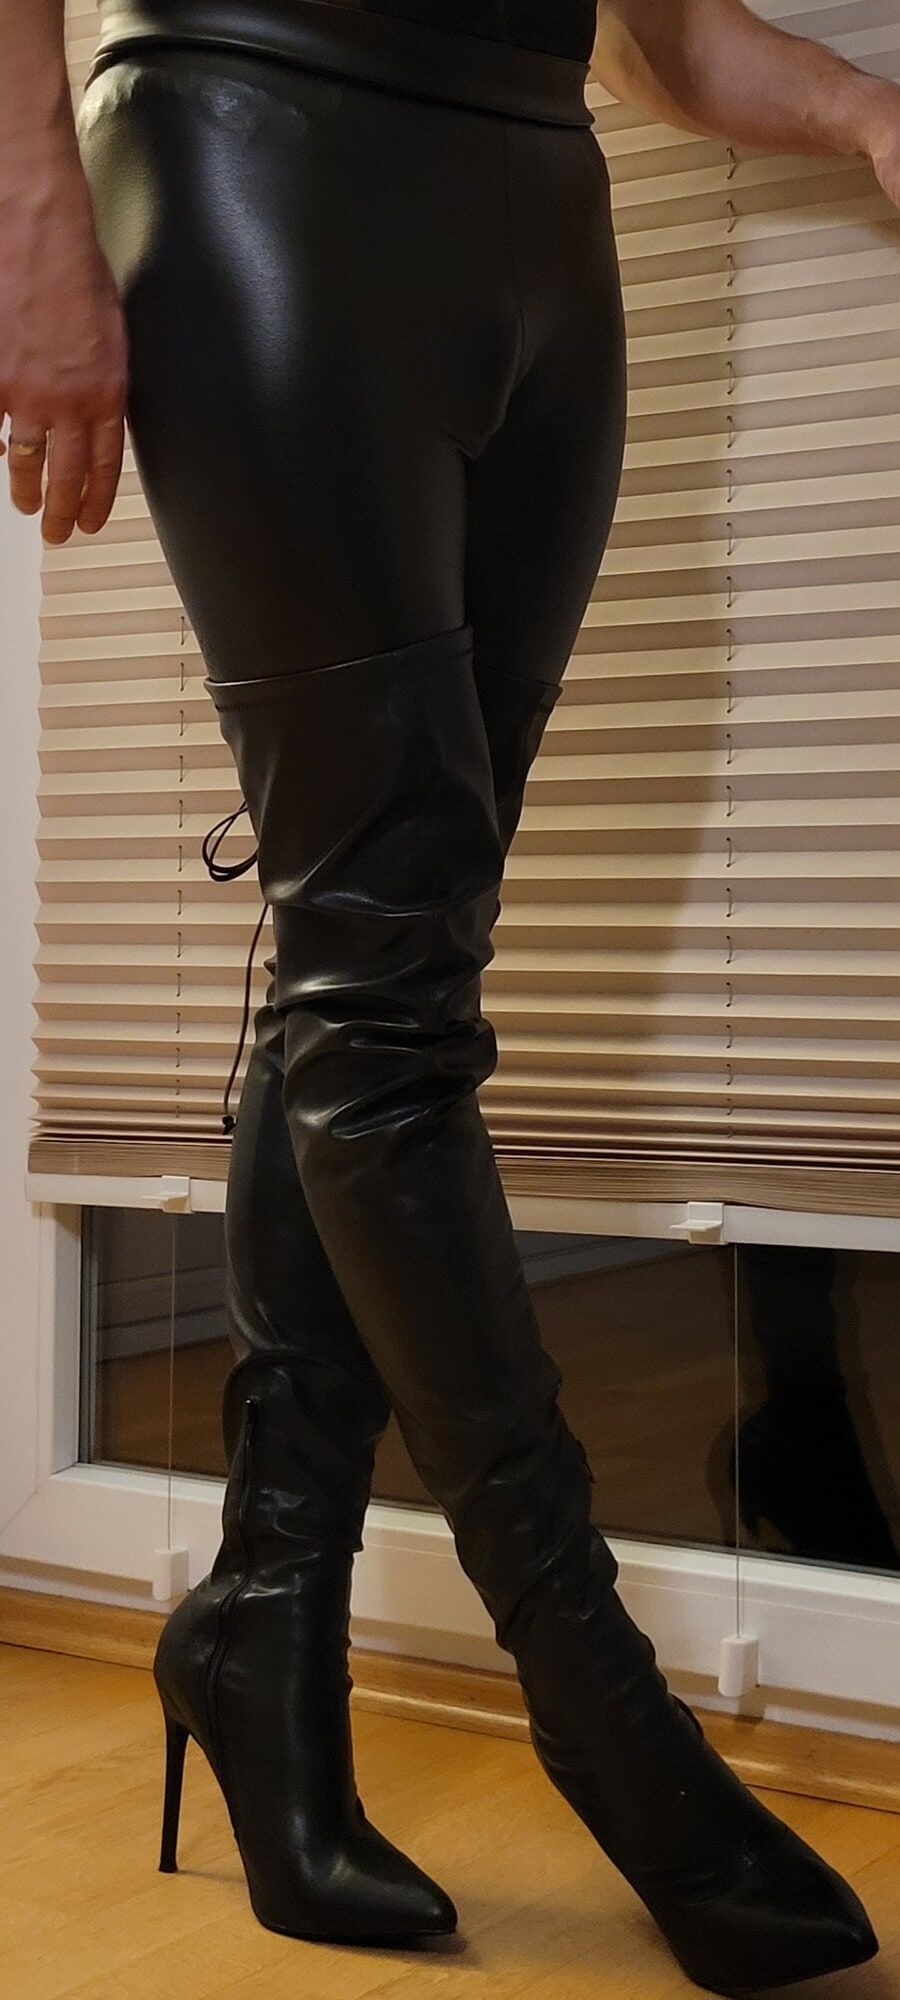 Me in Shiny Leggins and Overknee Boots 